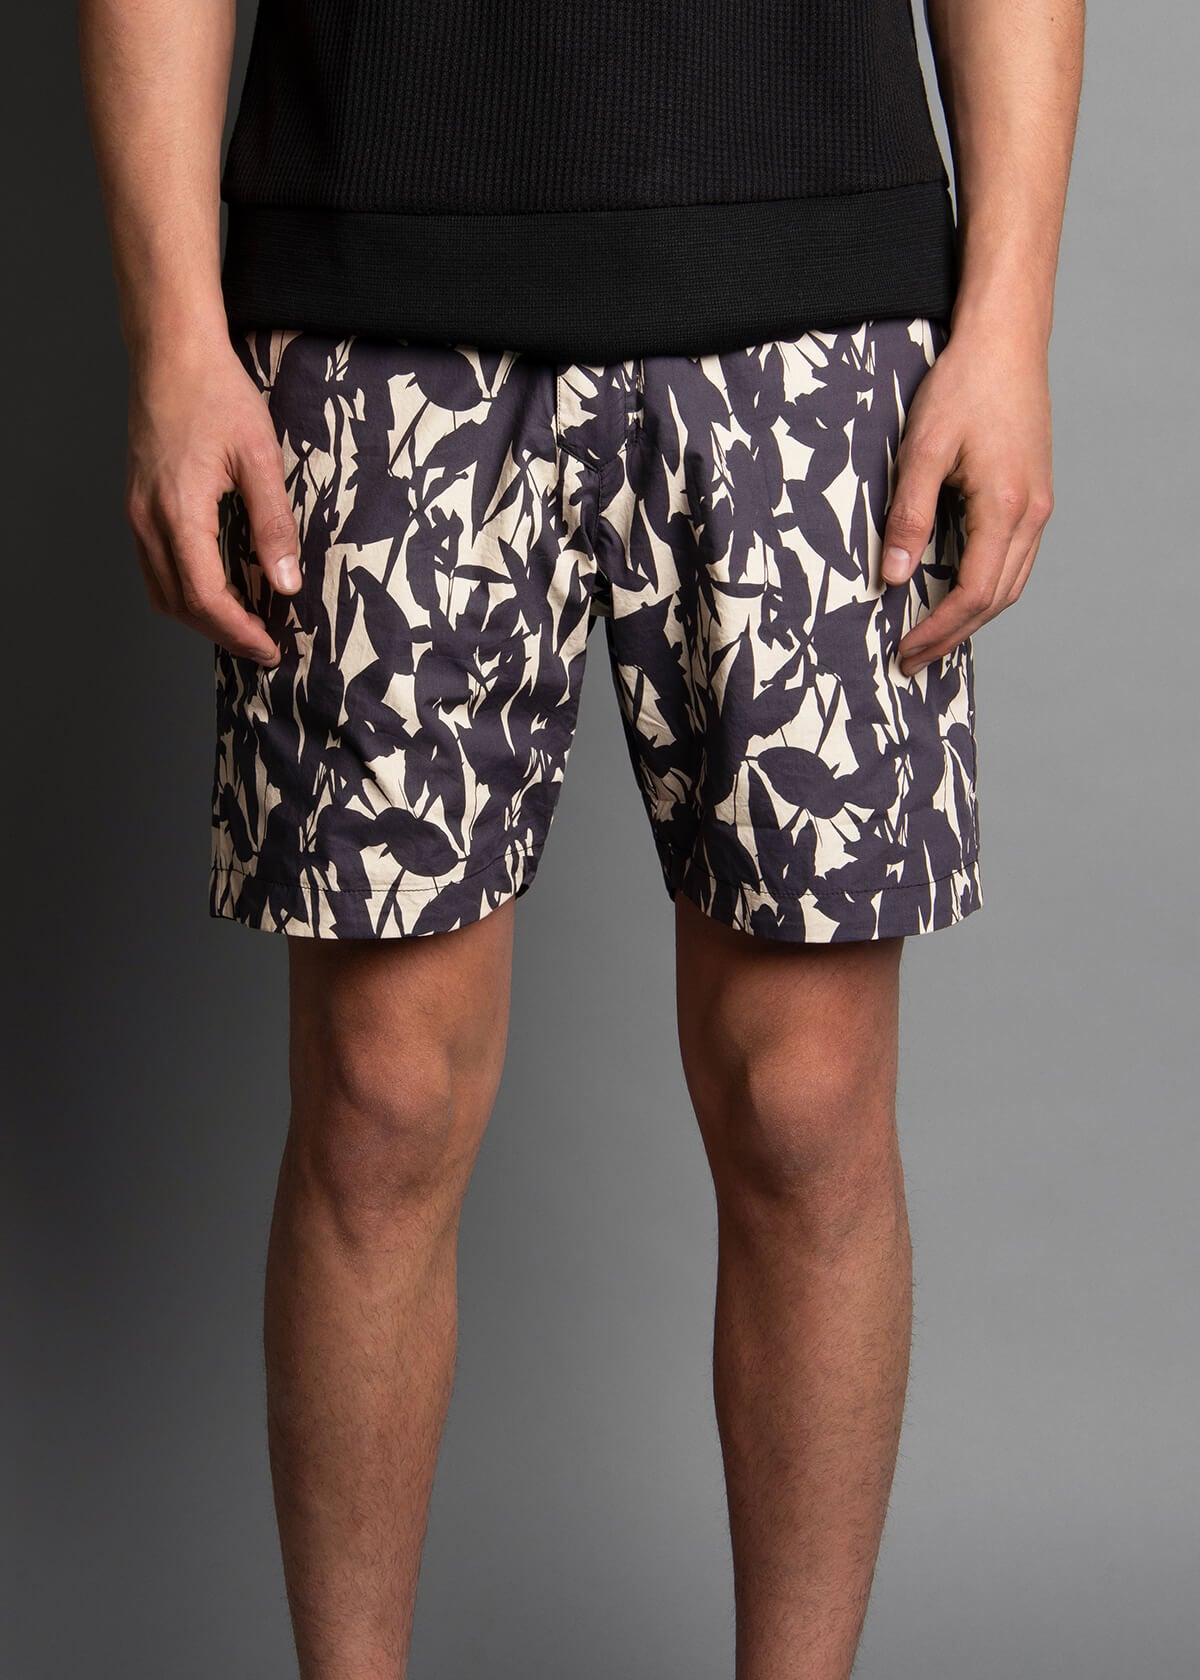 abstract floral print reversible men's short